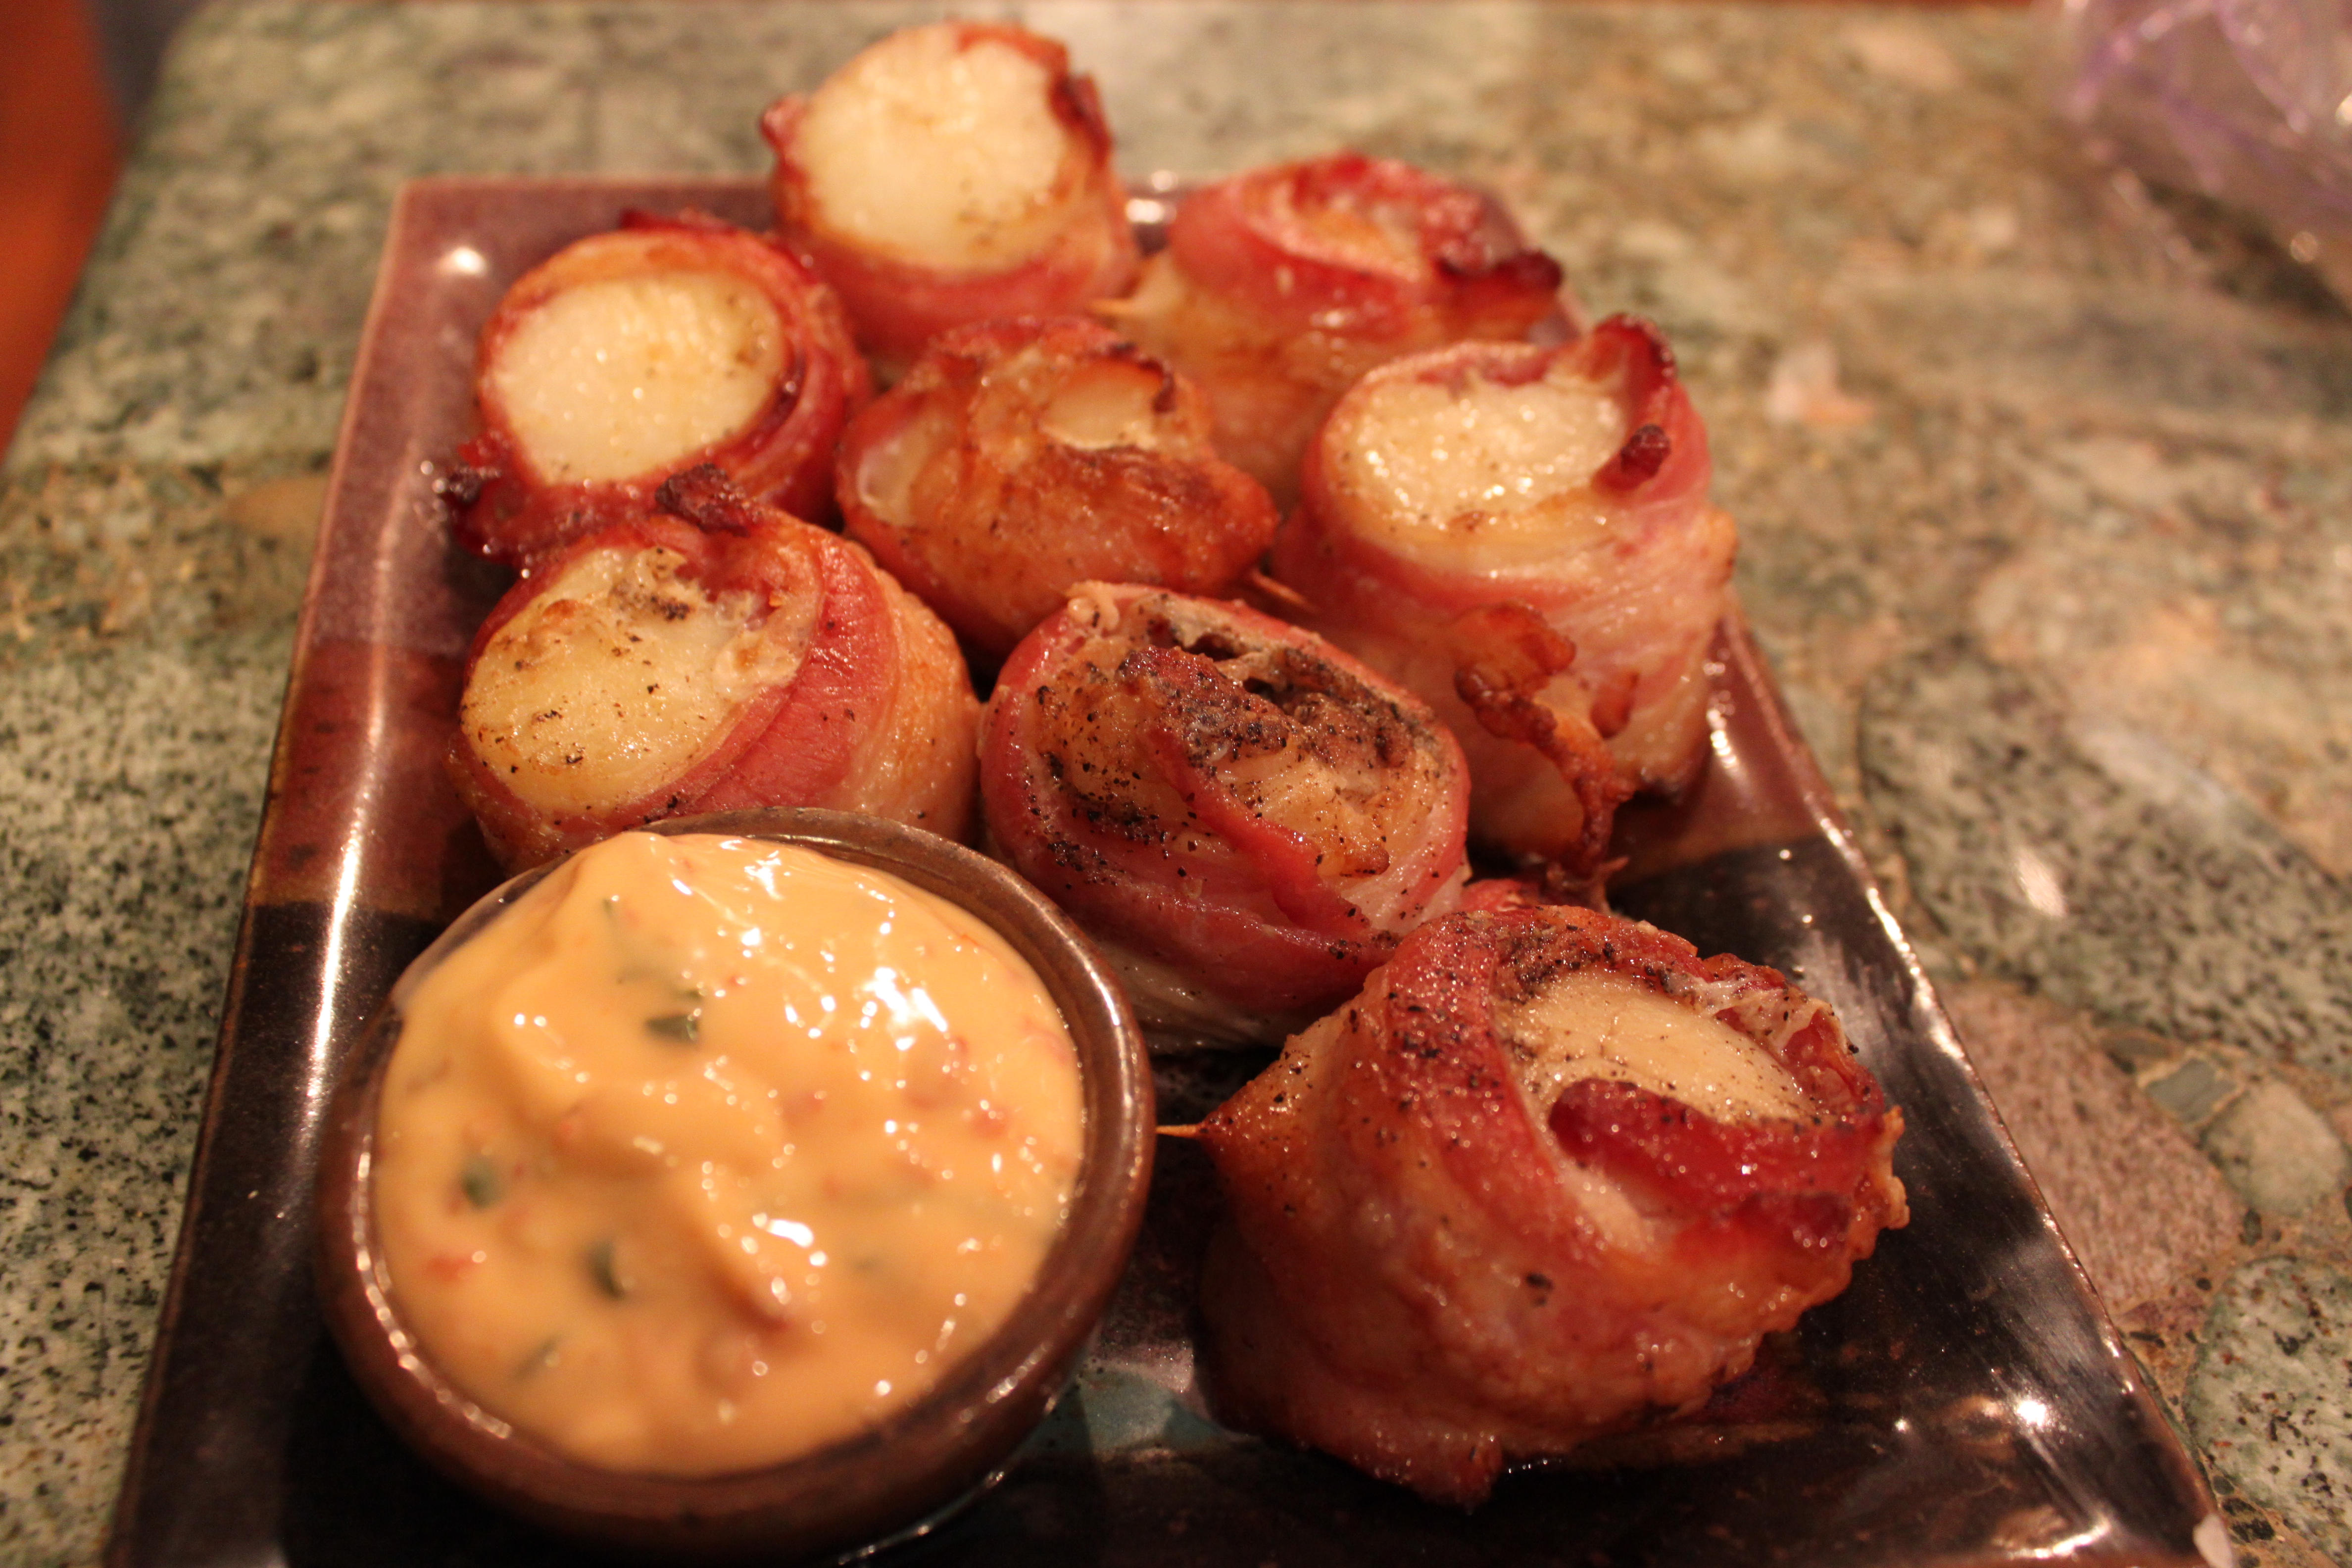 Bacon Wrapped Scallops with Spicy Mayo